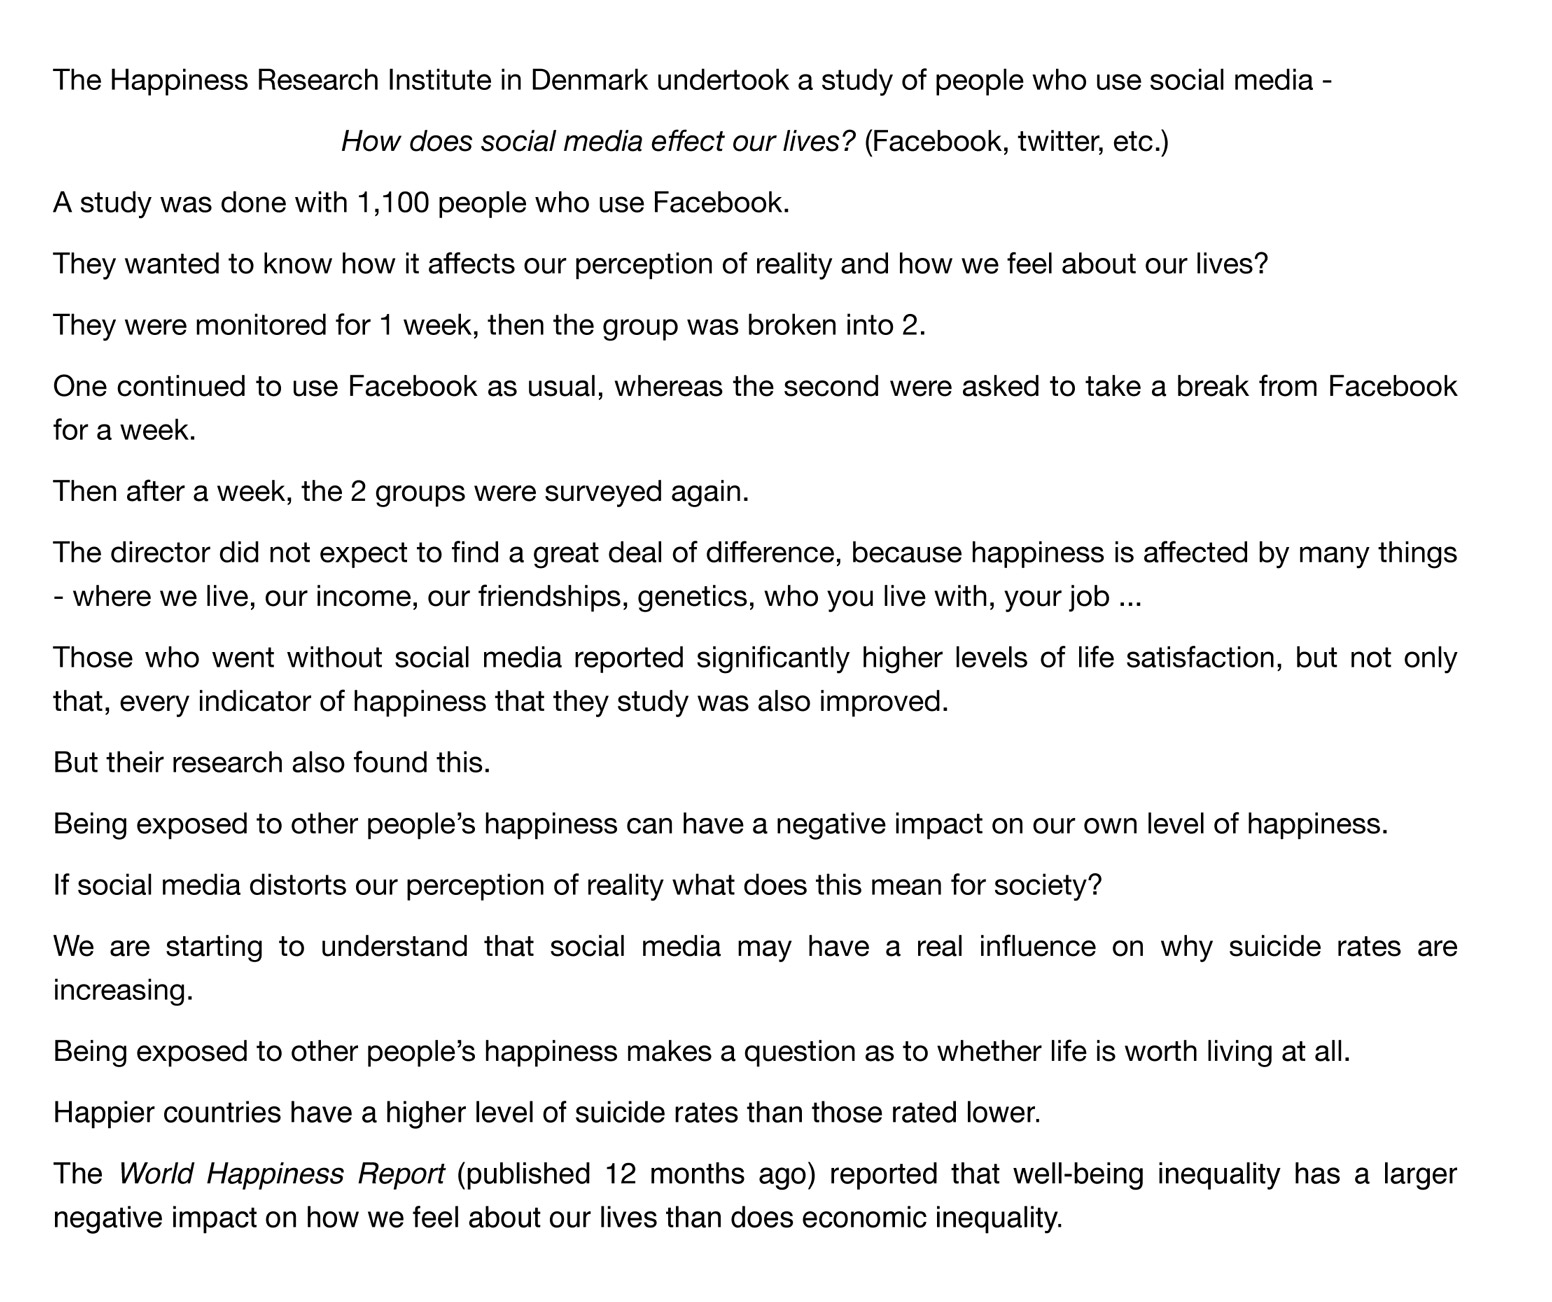 The Happiness Research Institute in Denmark undertook a study of people who use social media - How does social media effect our lives? (Facebook, twitter, etc.) A study was done with 1,100 people who use Facebook. They wanted to know how it affects our perception of reality and how we feel about our lives? They were monitored for 1 week, then the group was broken into 2. One continued to use Facebook as usual, whereas the second were asked to take a break from Facebook for a week. Then after a week, the 2 groups were surveyed again. The director did not expect to find a great deal of difference, because happiness is affected by many things - where we live, our income, our friendships, genetics, who you live with, your job ... Those who went without social media reported significantly higher levels of life satisfaction, but not only that, every indicator of happiness that they study was also improved. But their research also found this. Being exposed to other people’s happiness can have a negative impact on our own level of happiness. If social media distorts our perception of reality what does this mean for society? We are starting to understand that social media may have a real influence on why suicide rates are increasing. Being exposed to other people’s happiness makes a question as to whether life is worth living at all. Happier countries have a higher level of suicide rates than those rated lower. The World Happiness Report (published 12 months ago) reported that well-being inequality has a larger negative impact on how we feel about our lives than does economic inequality.